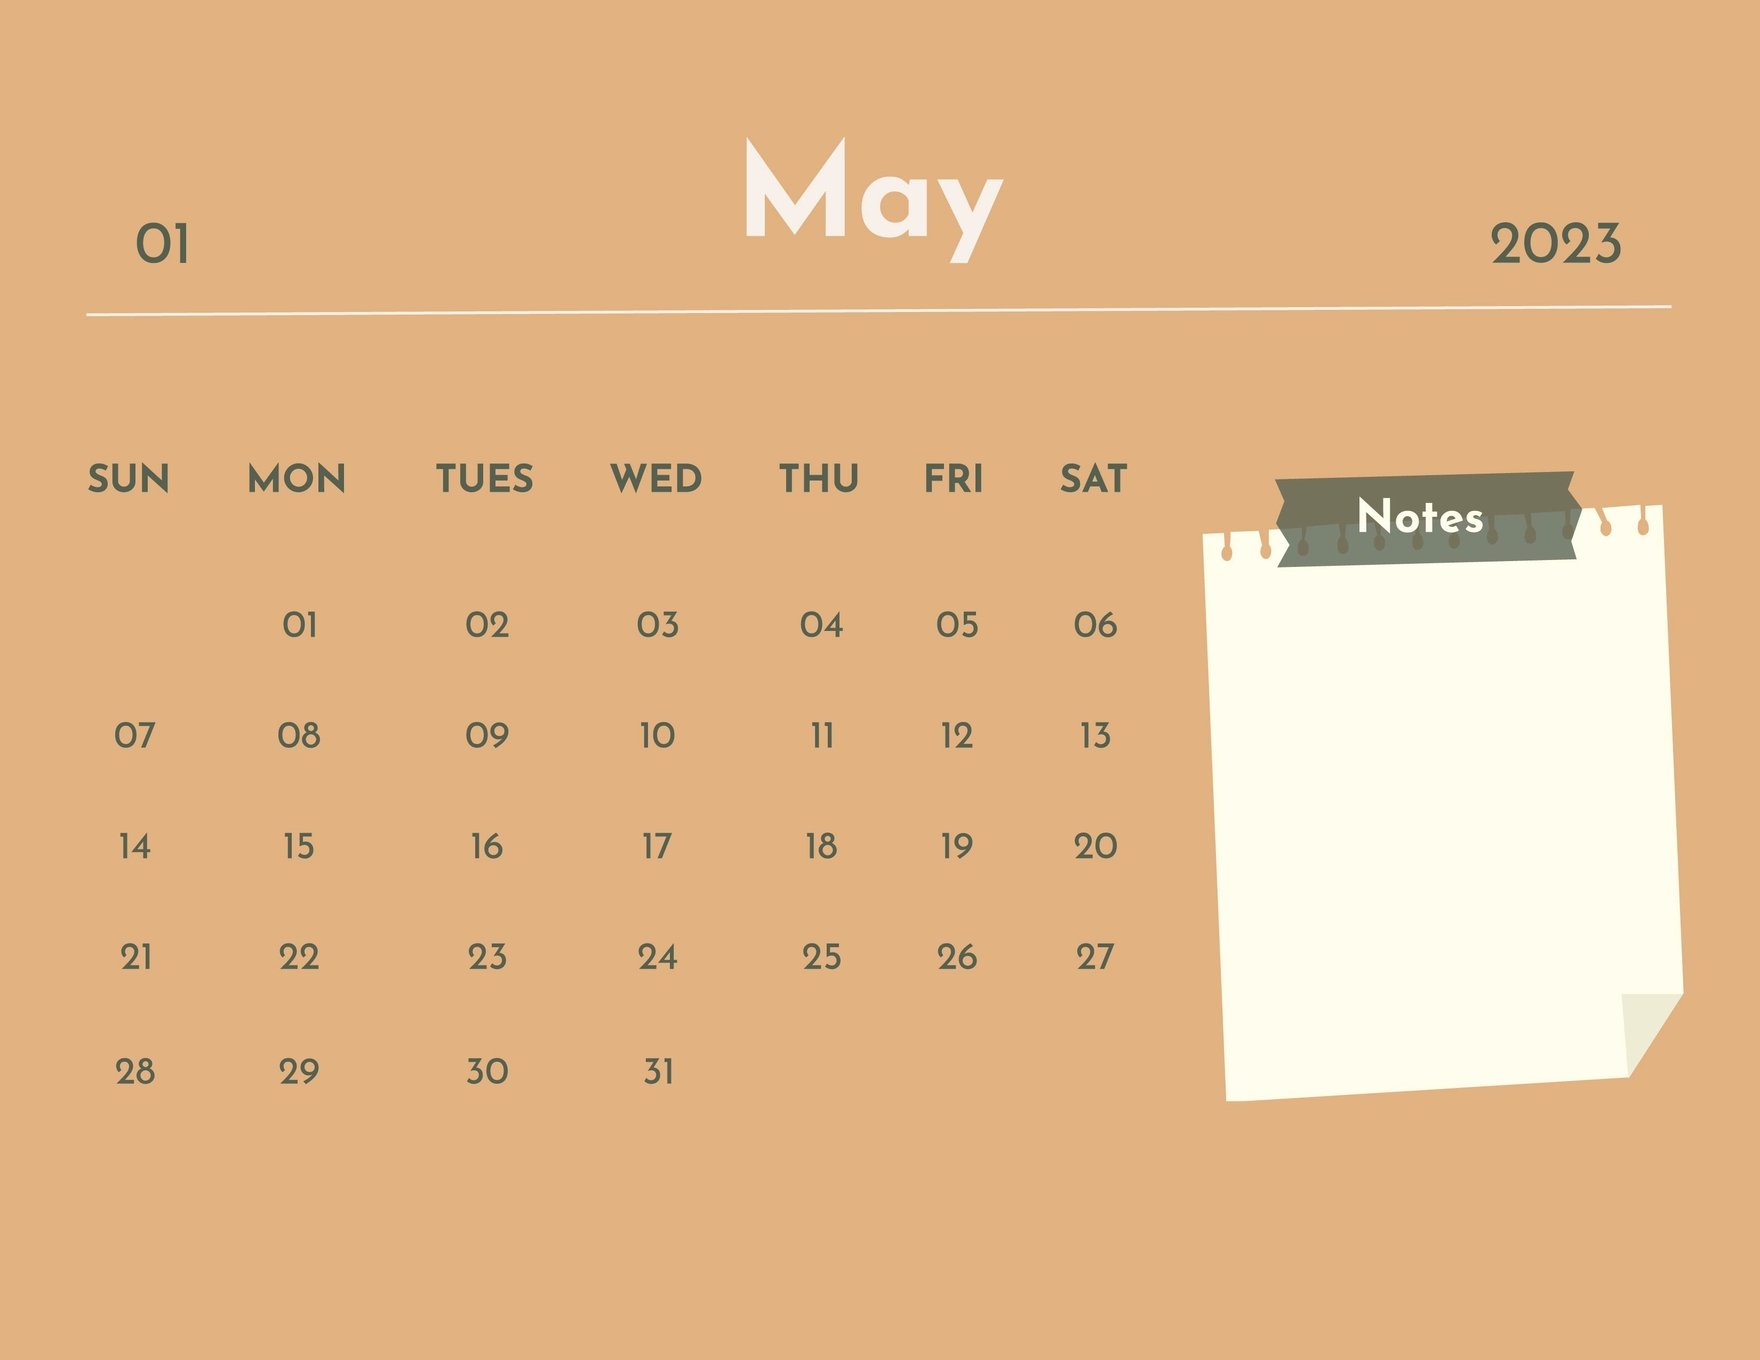 Blank May 2023 Calendar Template in Word, Google Docs, Illustrator, PSD, Apple Pages